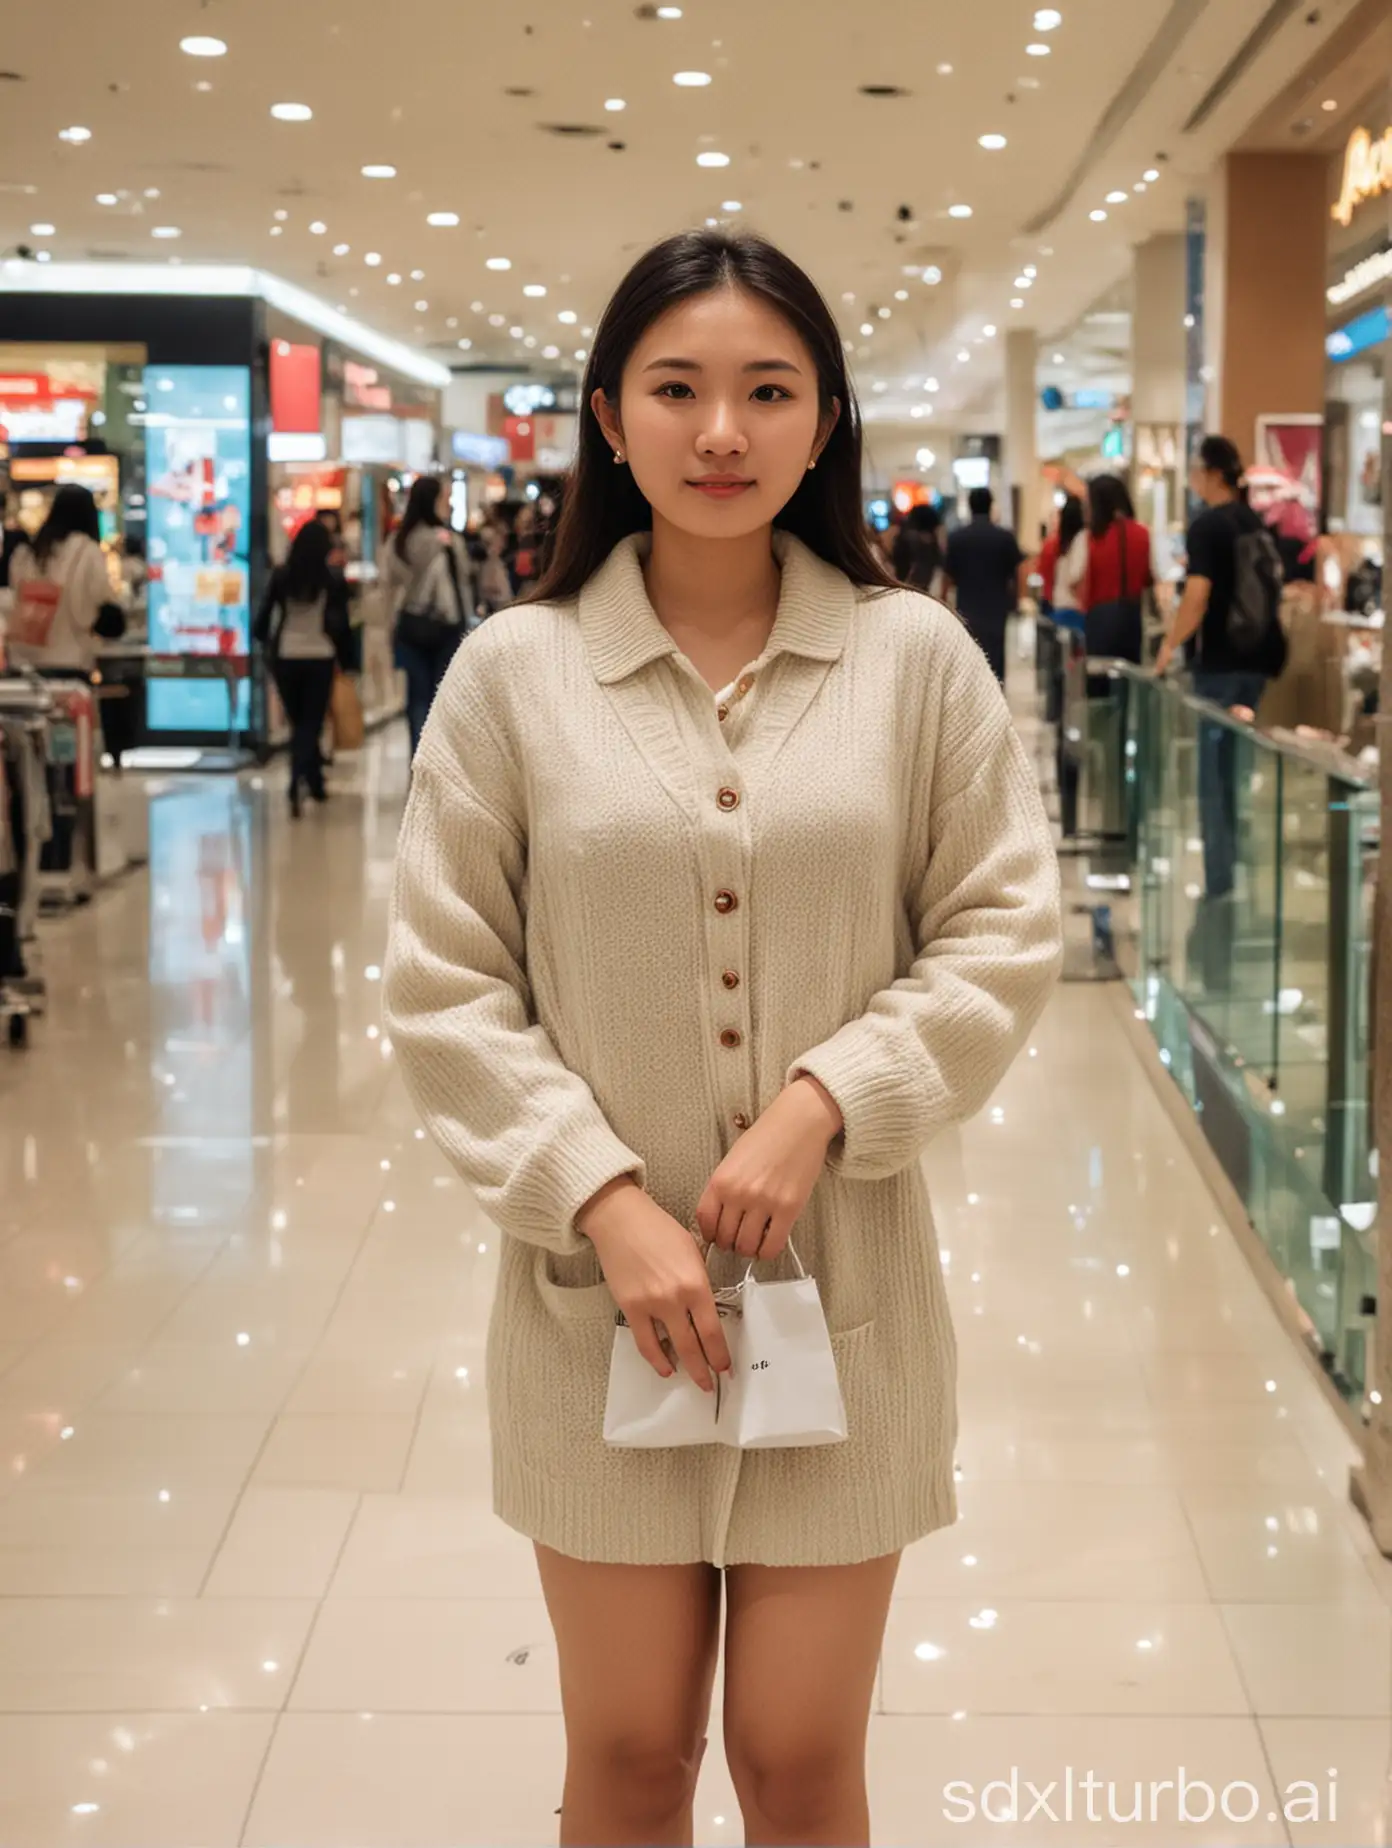 Asian-Woman-Shopping-at-the-Mall-in-Her-MidTwenties